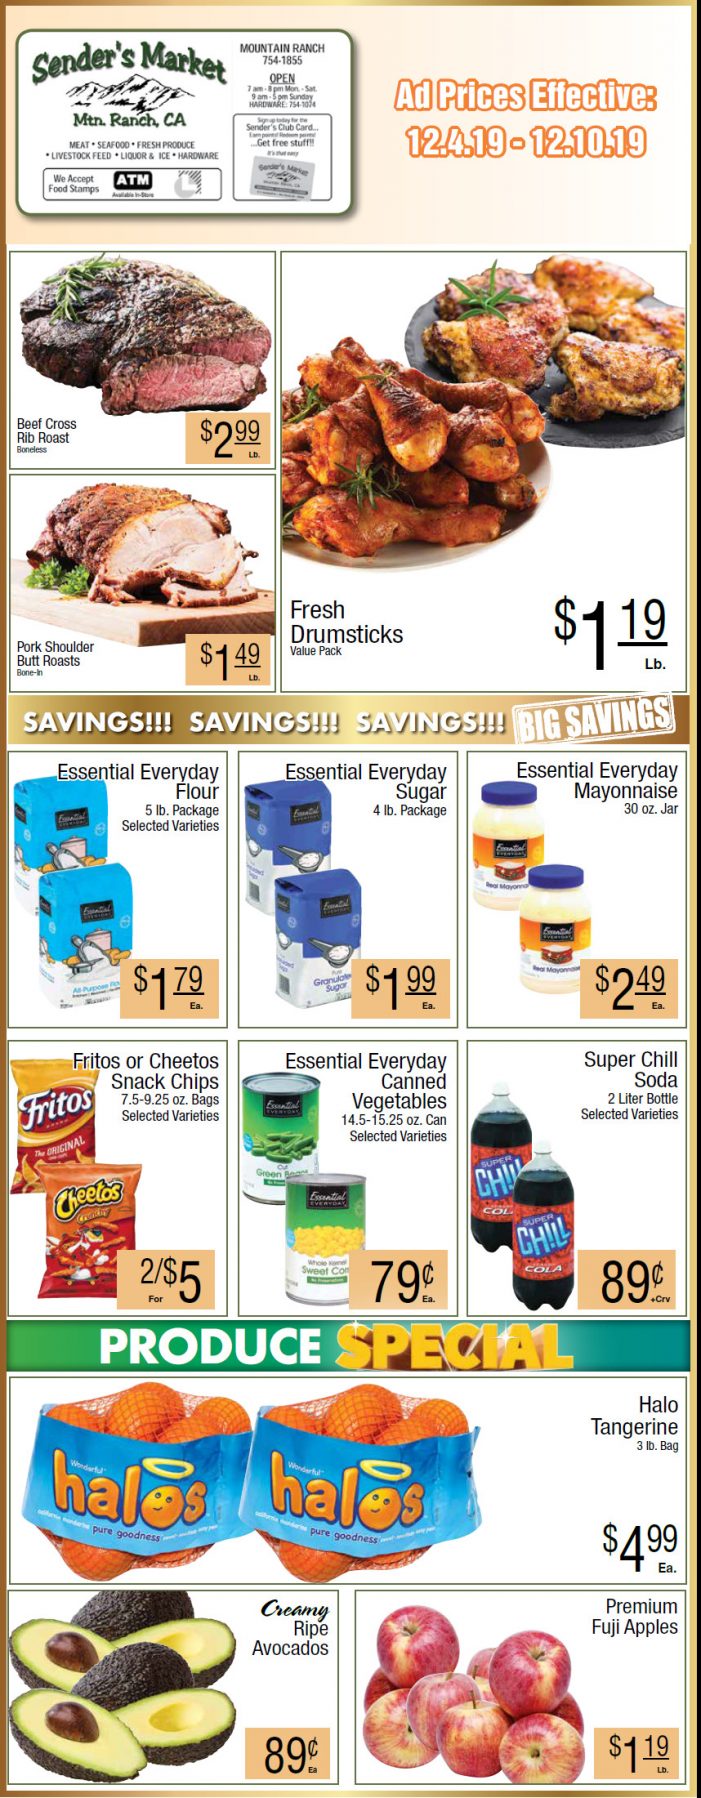 Sender’s Market’s Grocery Ad & Grocery Specials Through December 10th